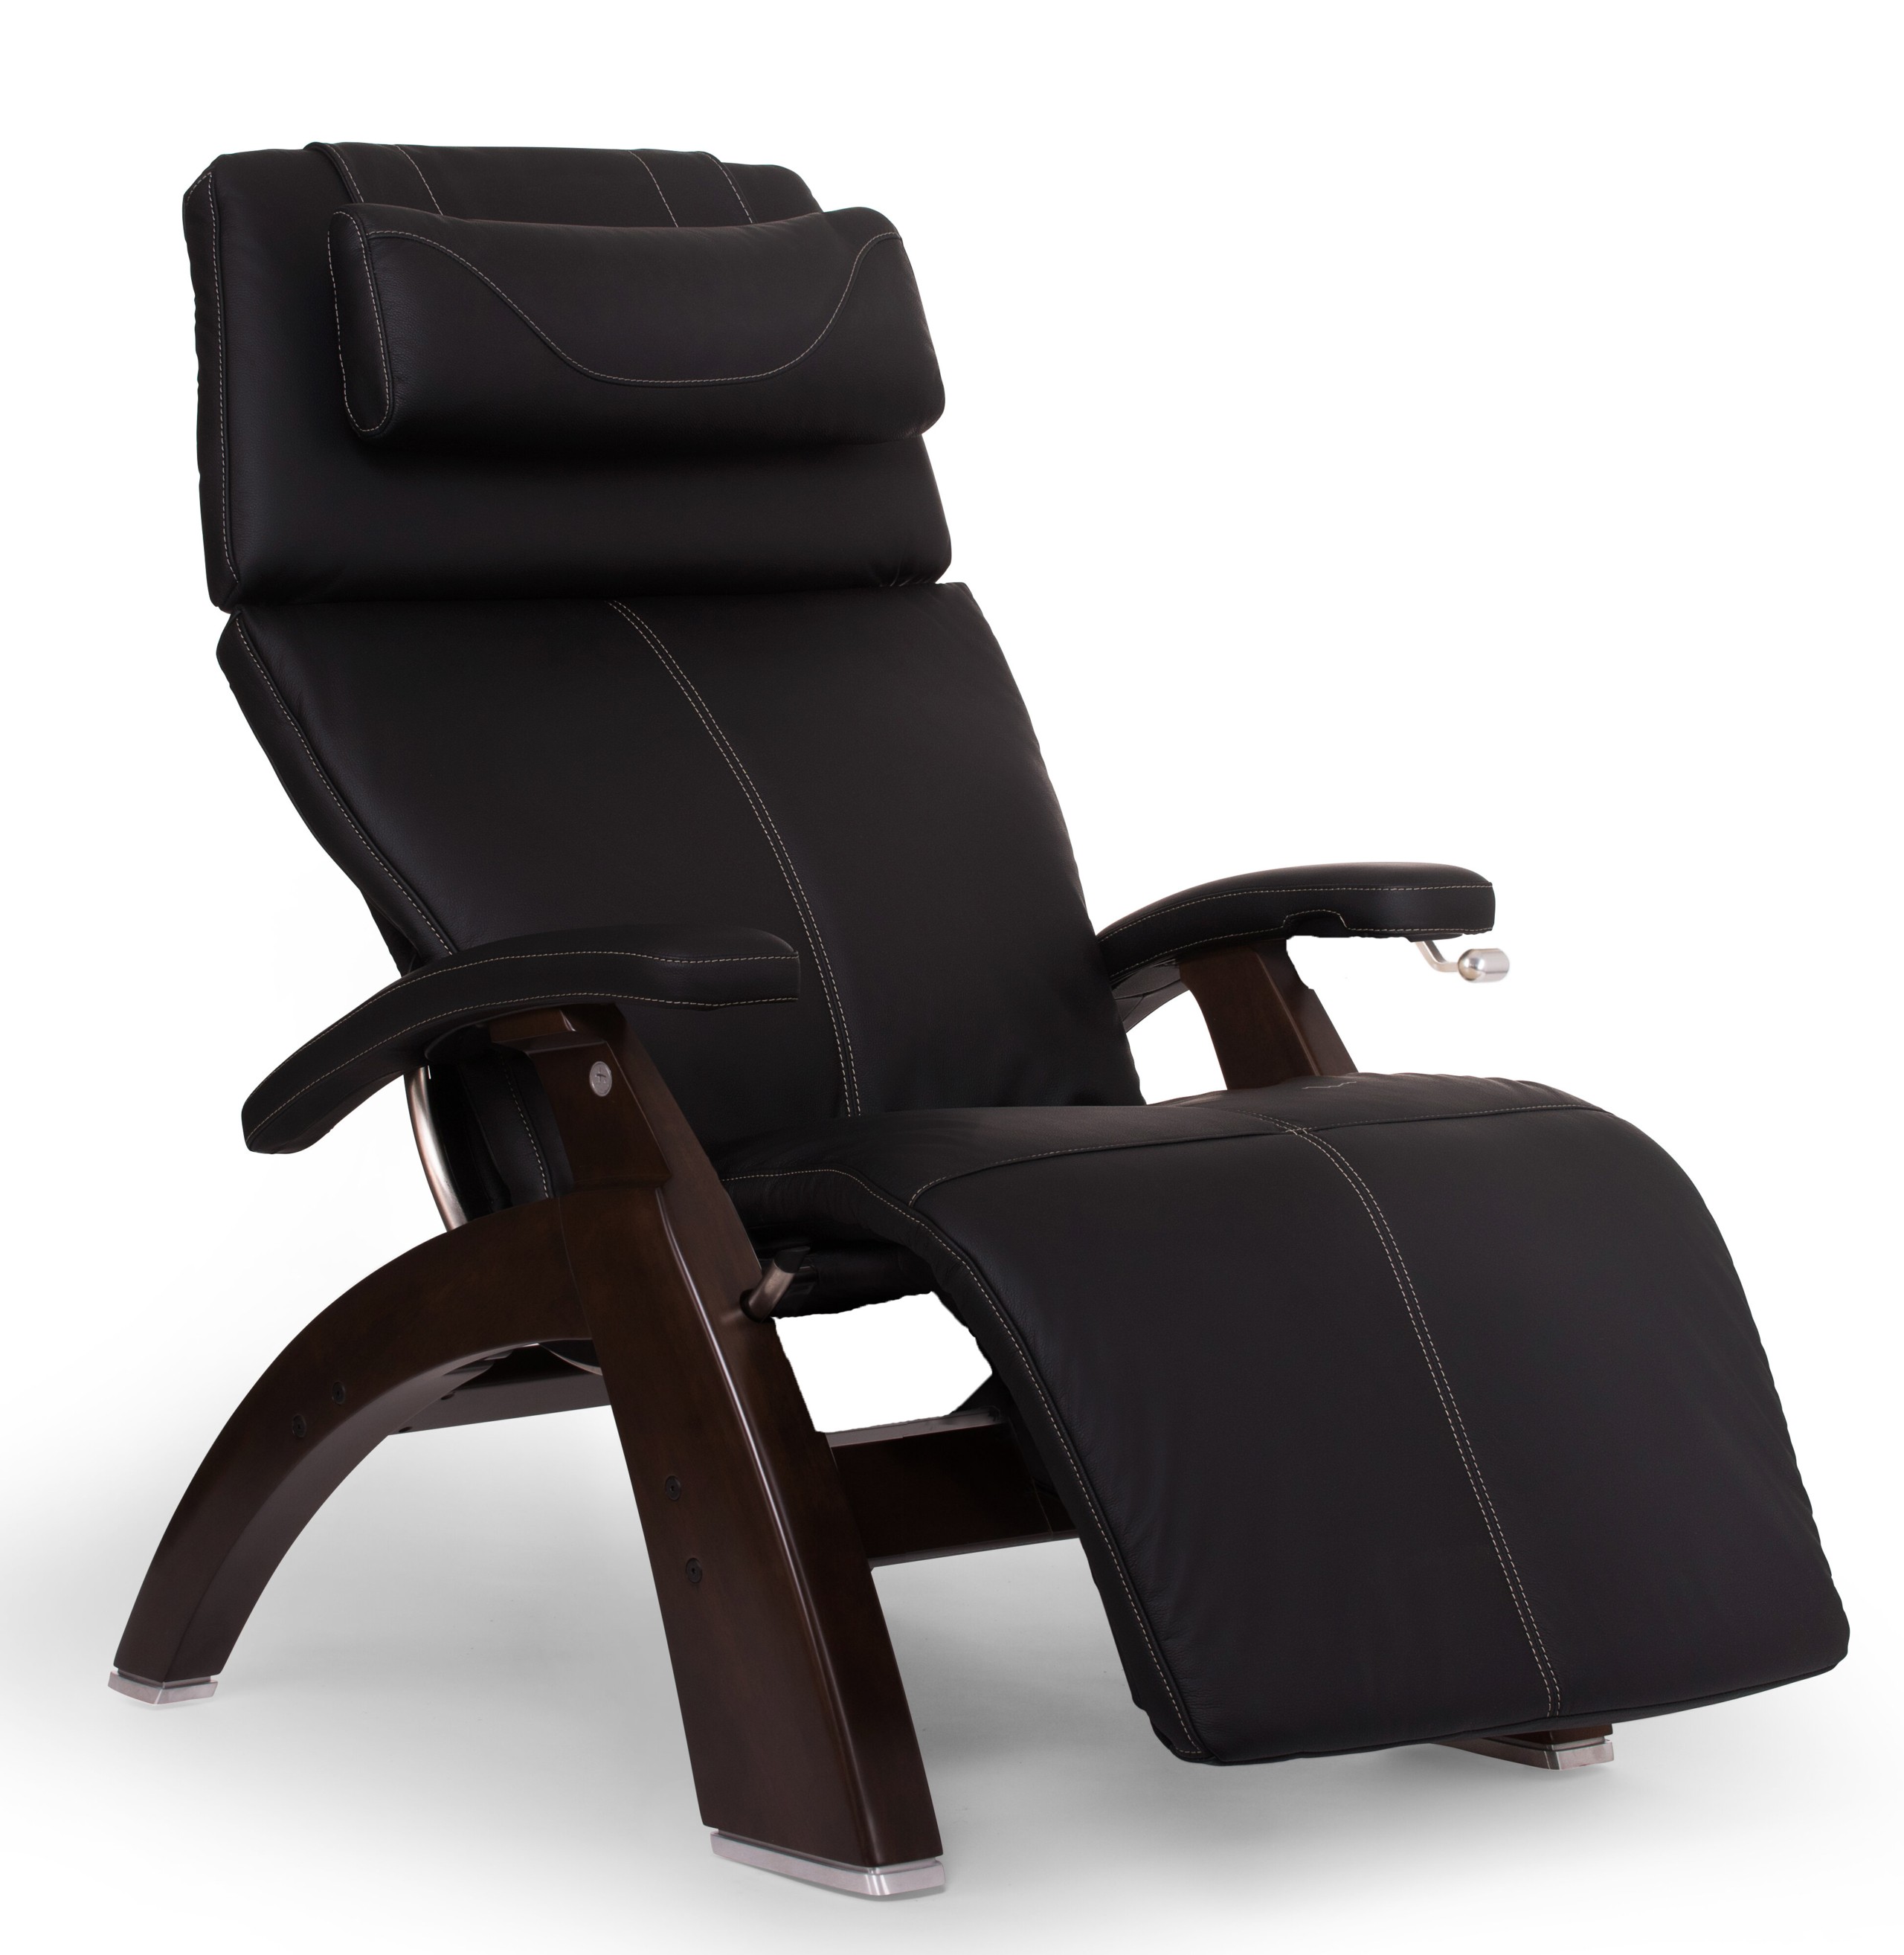 Old Fashioned Manual Glider Recliner Chair